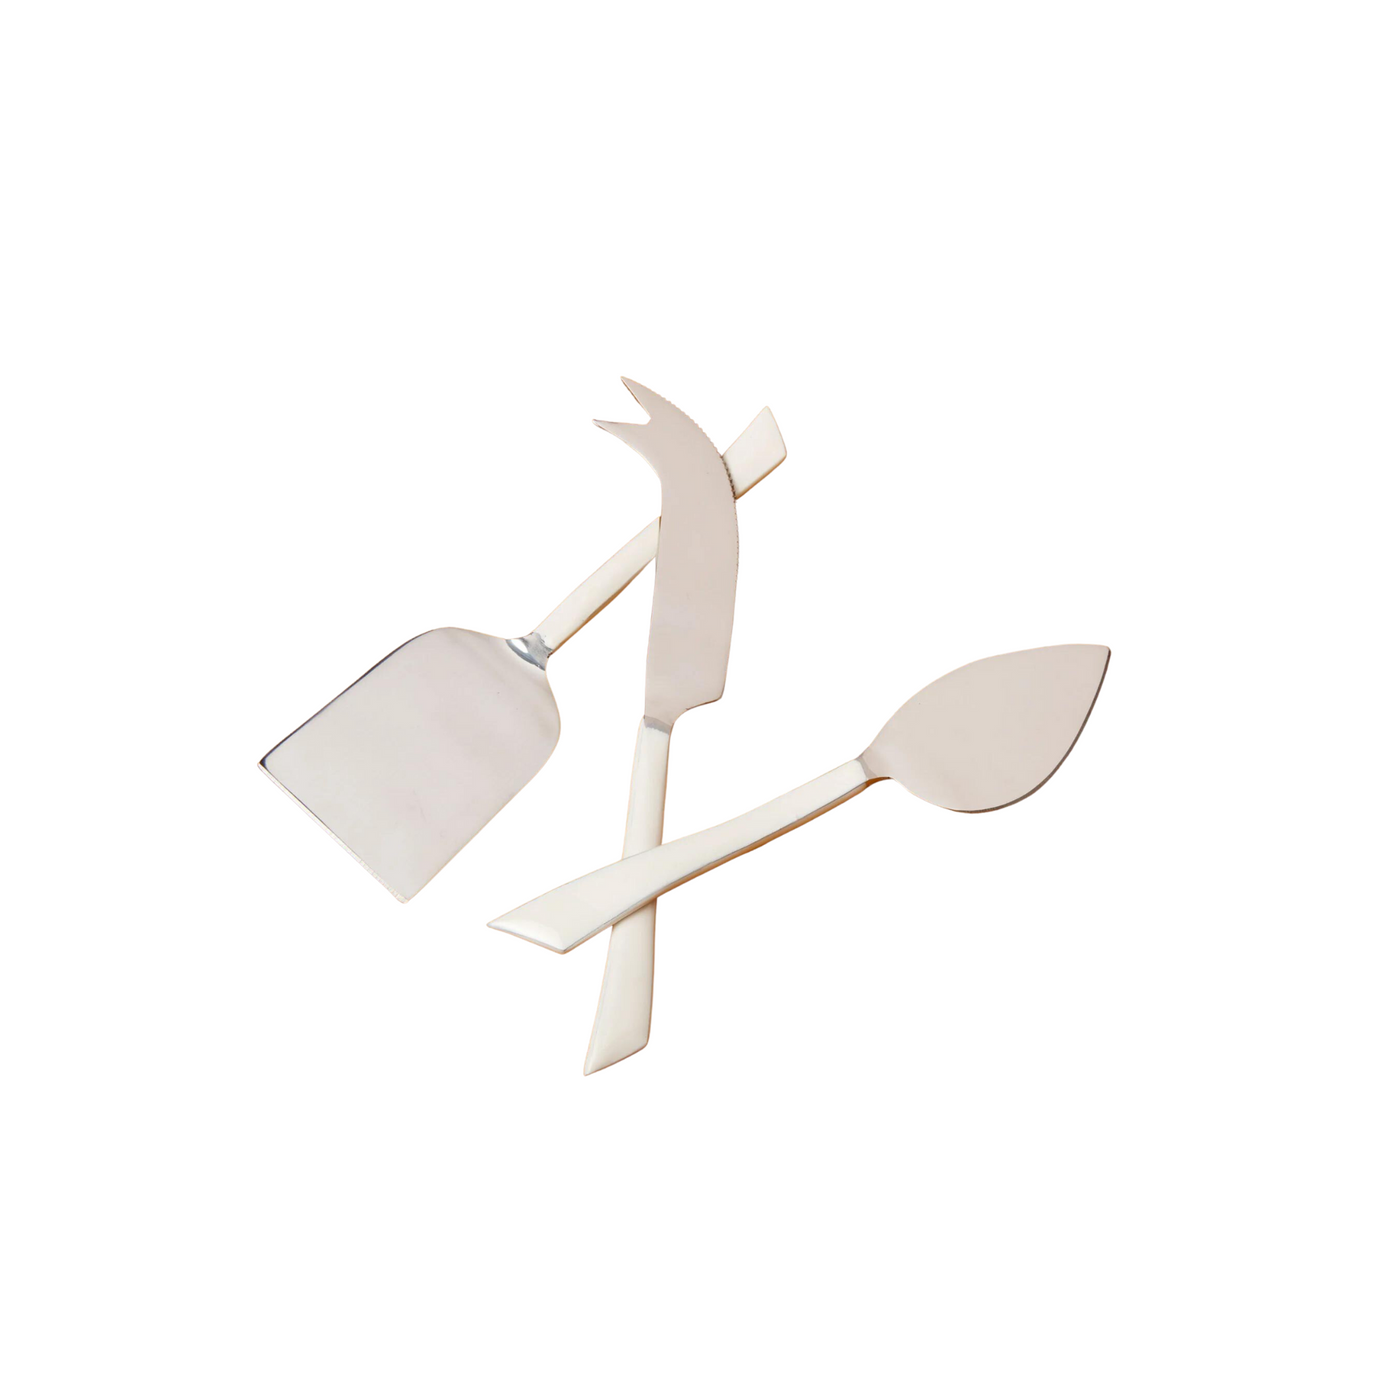 Stainless & White Dipped Enamel Cheese Set by Be Home